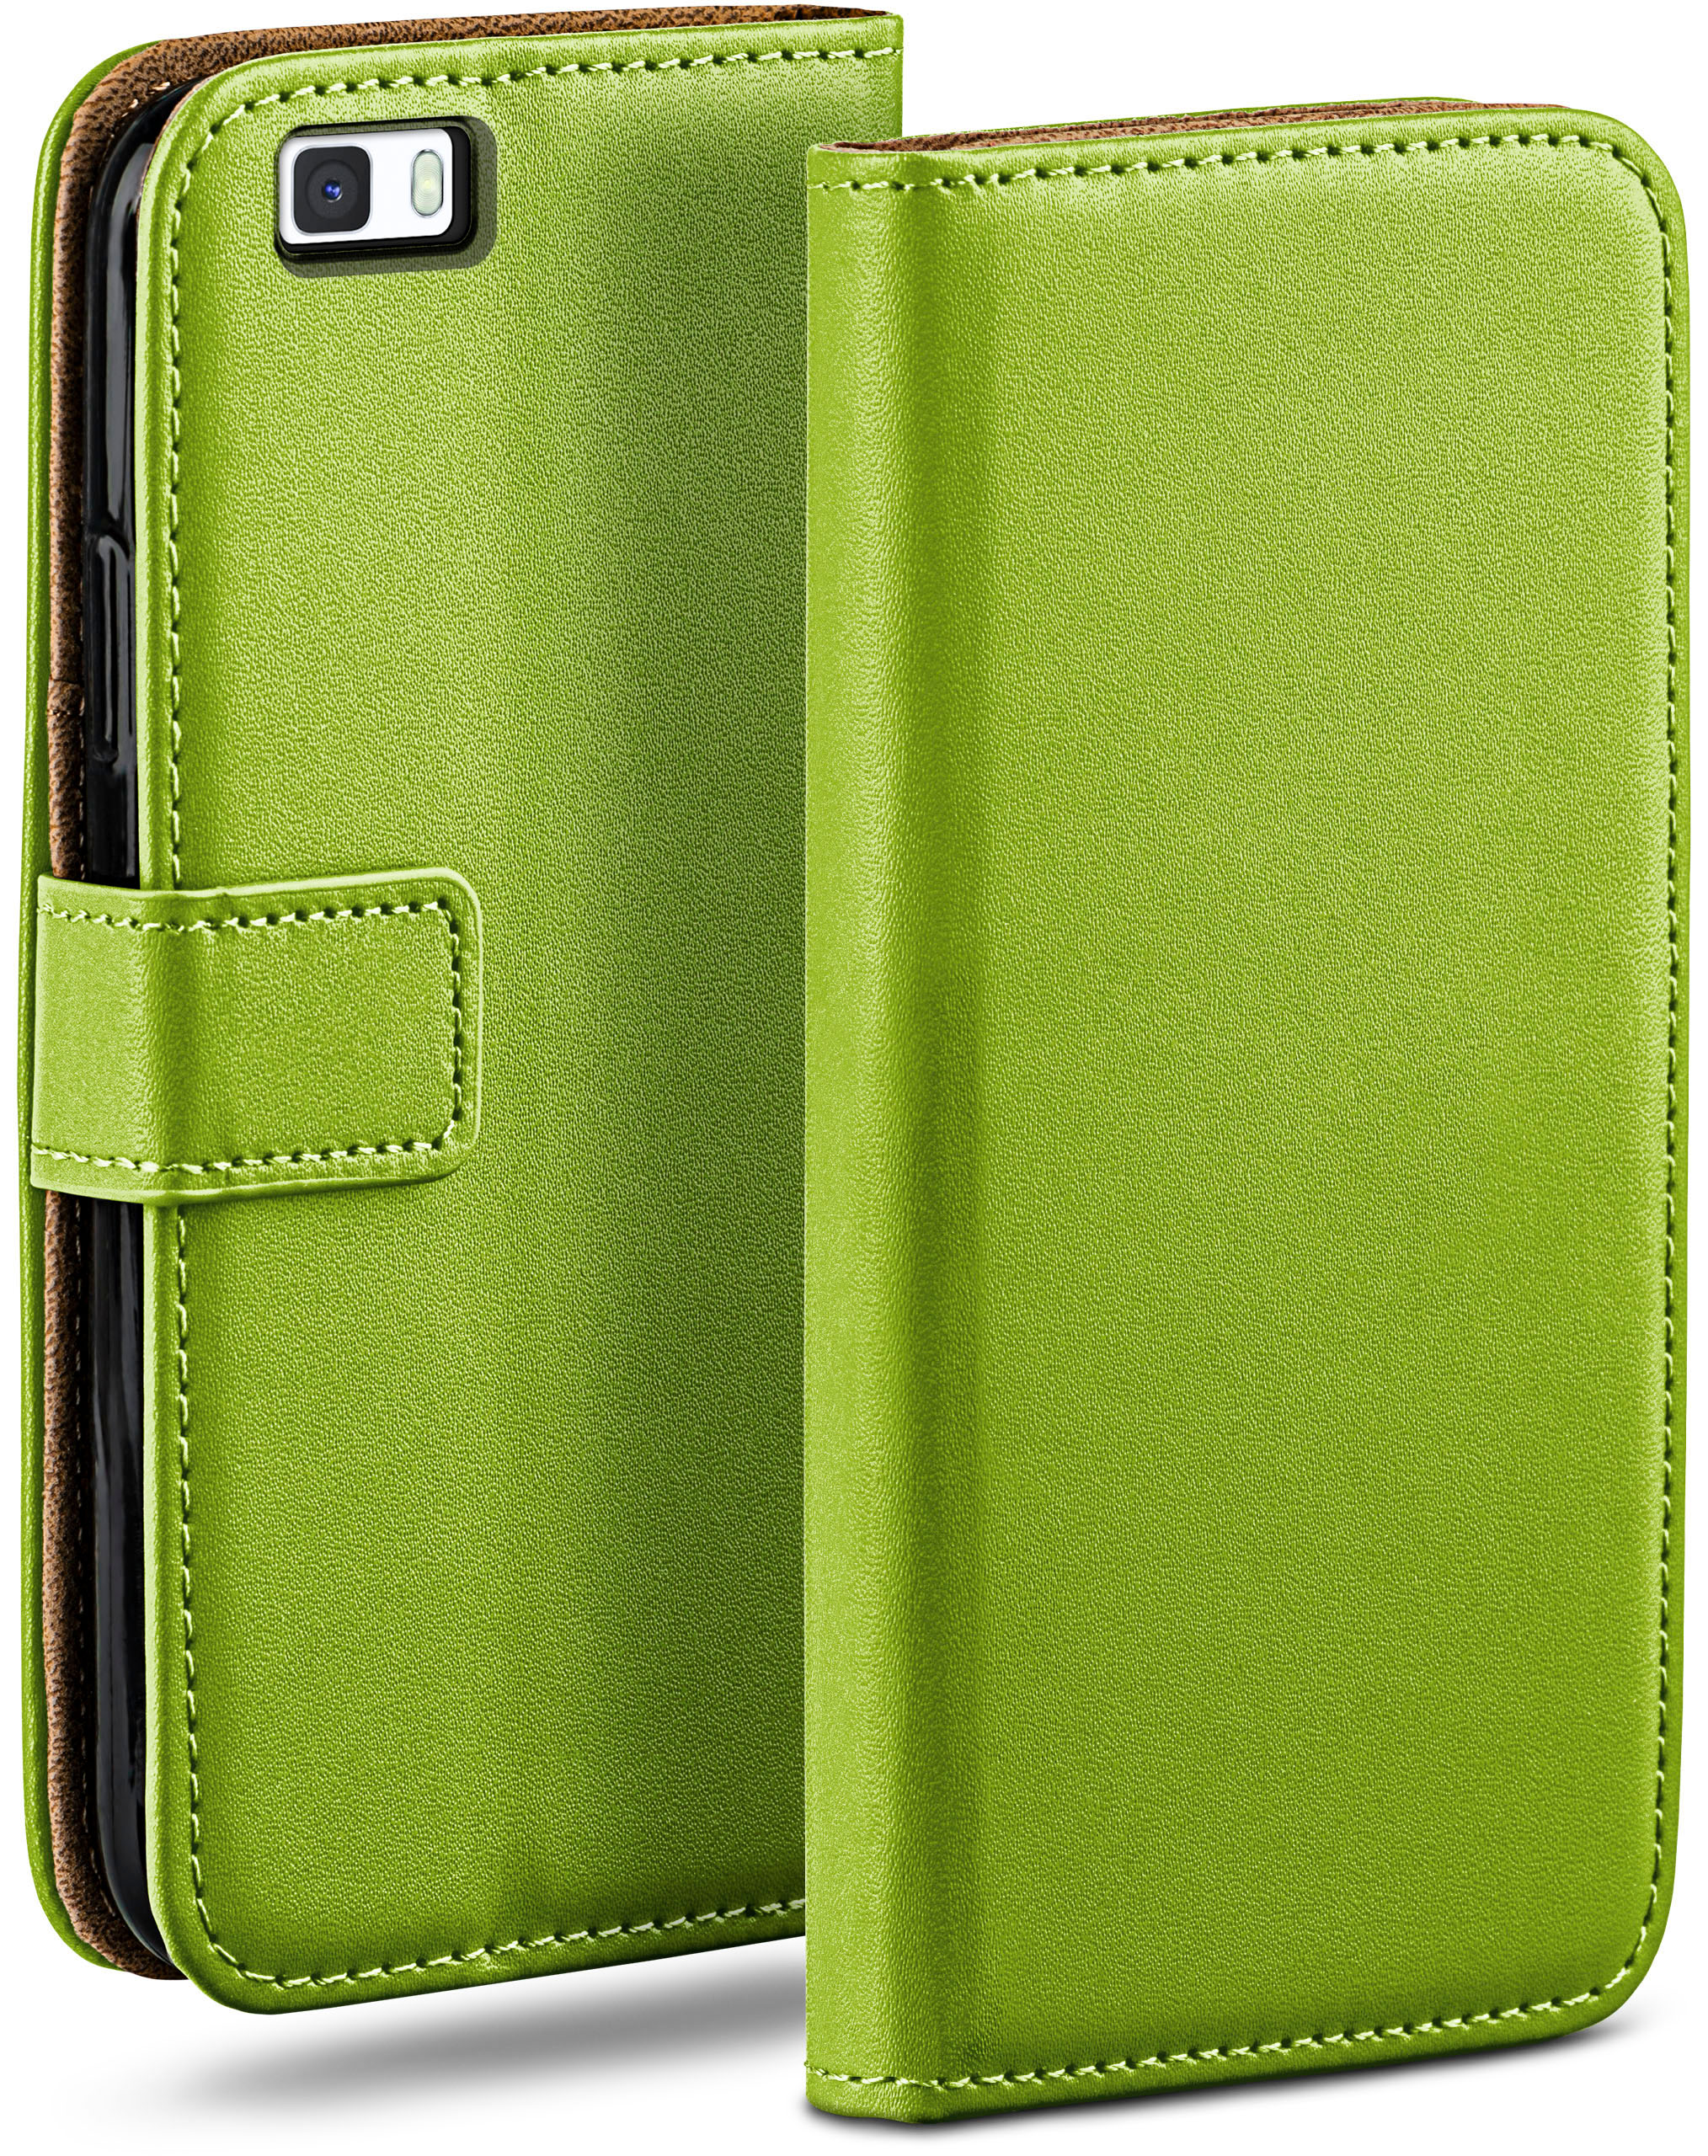 Bookcover, Lime-Green Huawei, Book MOEX Case, P8 2015, Lite